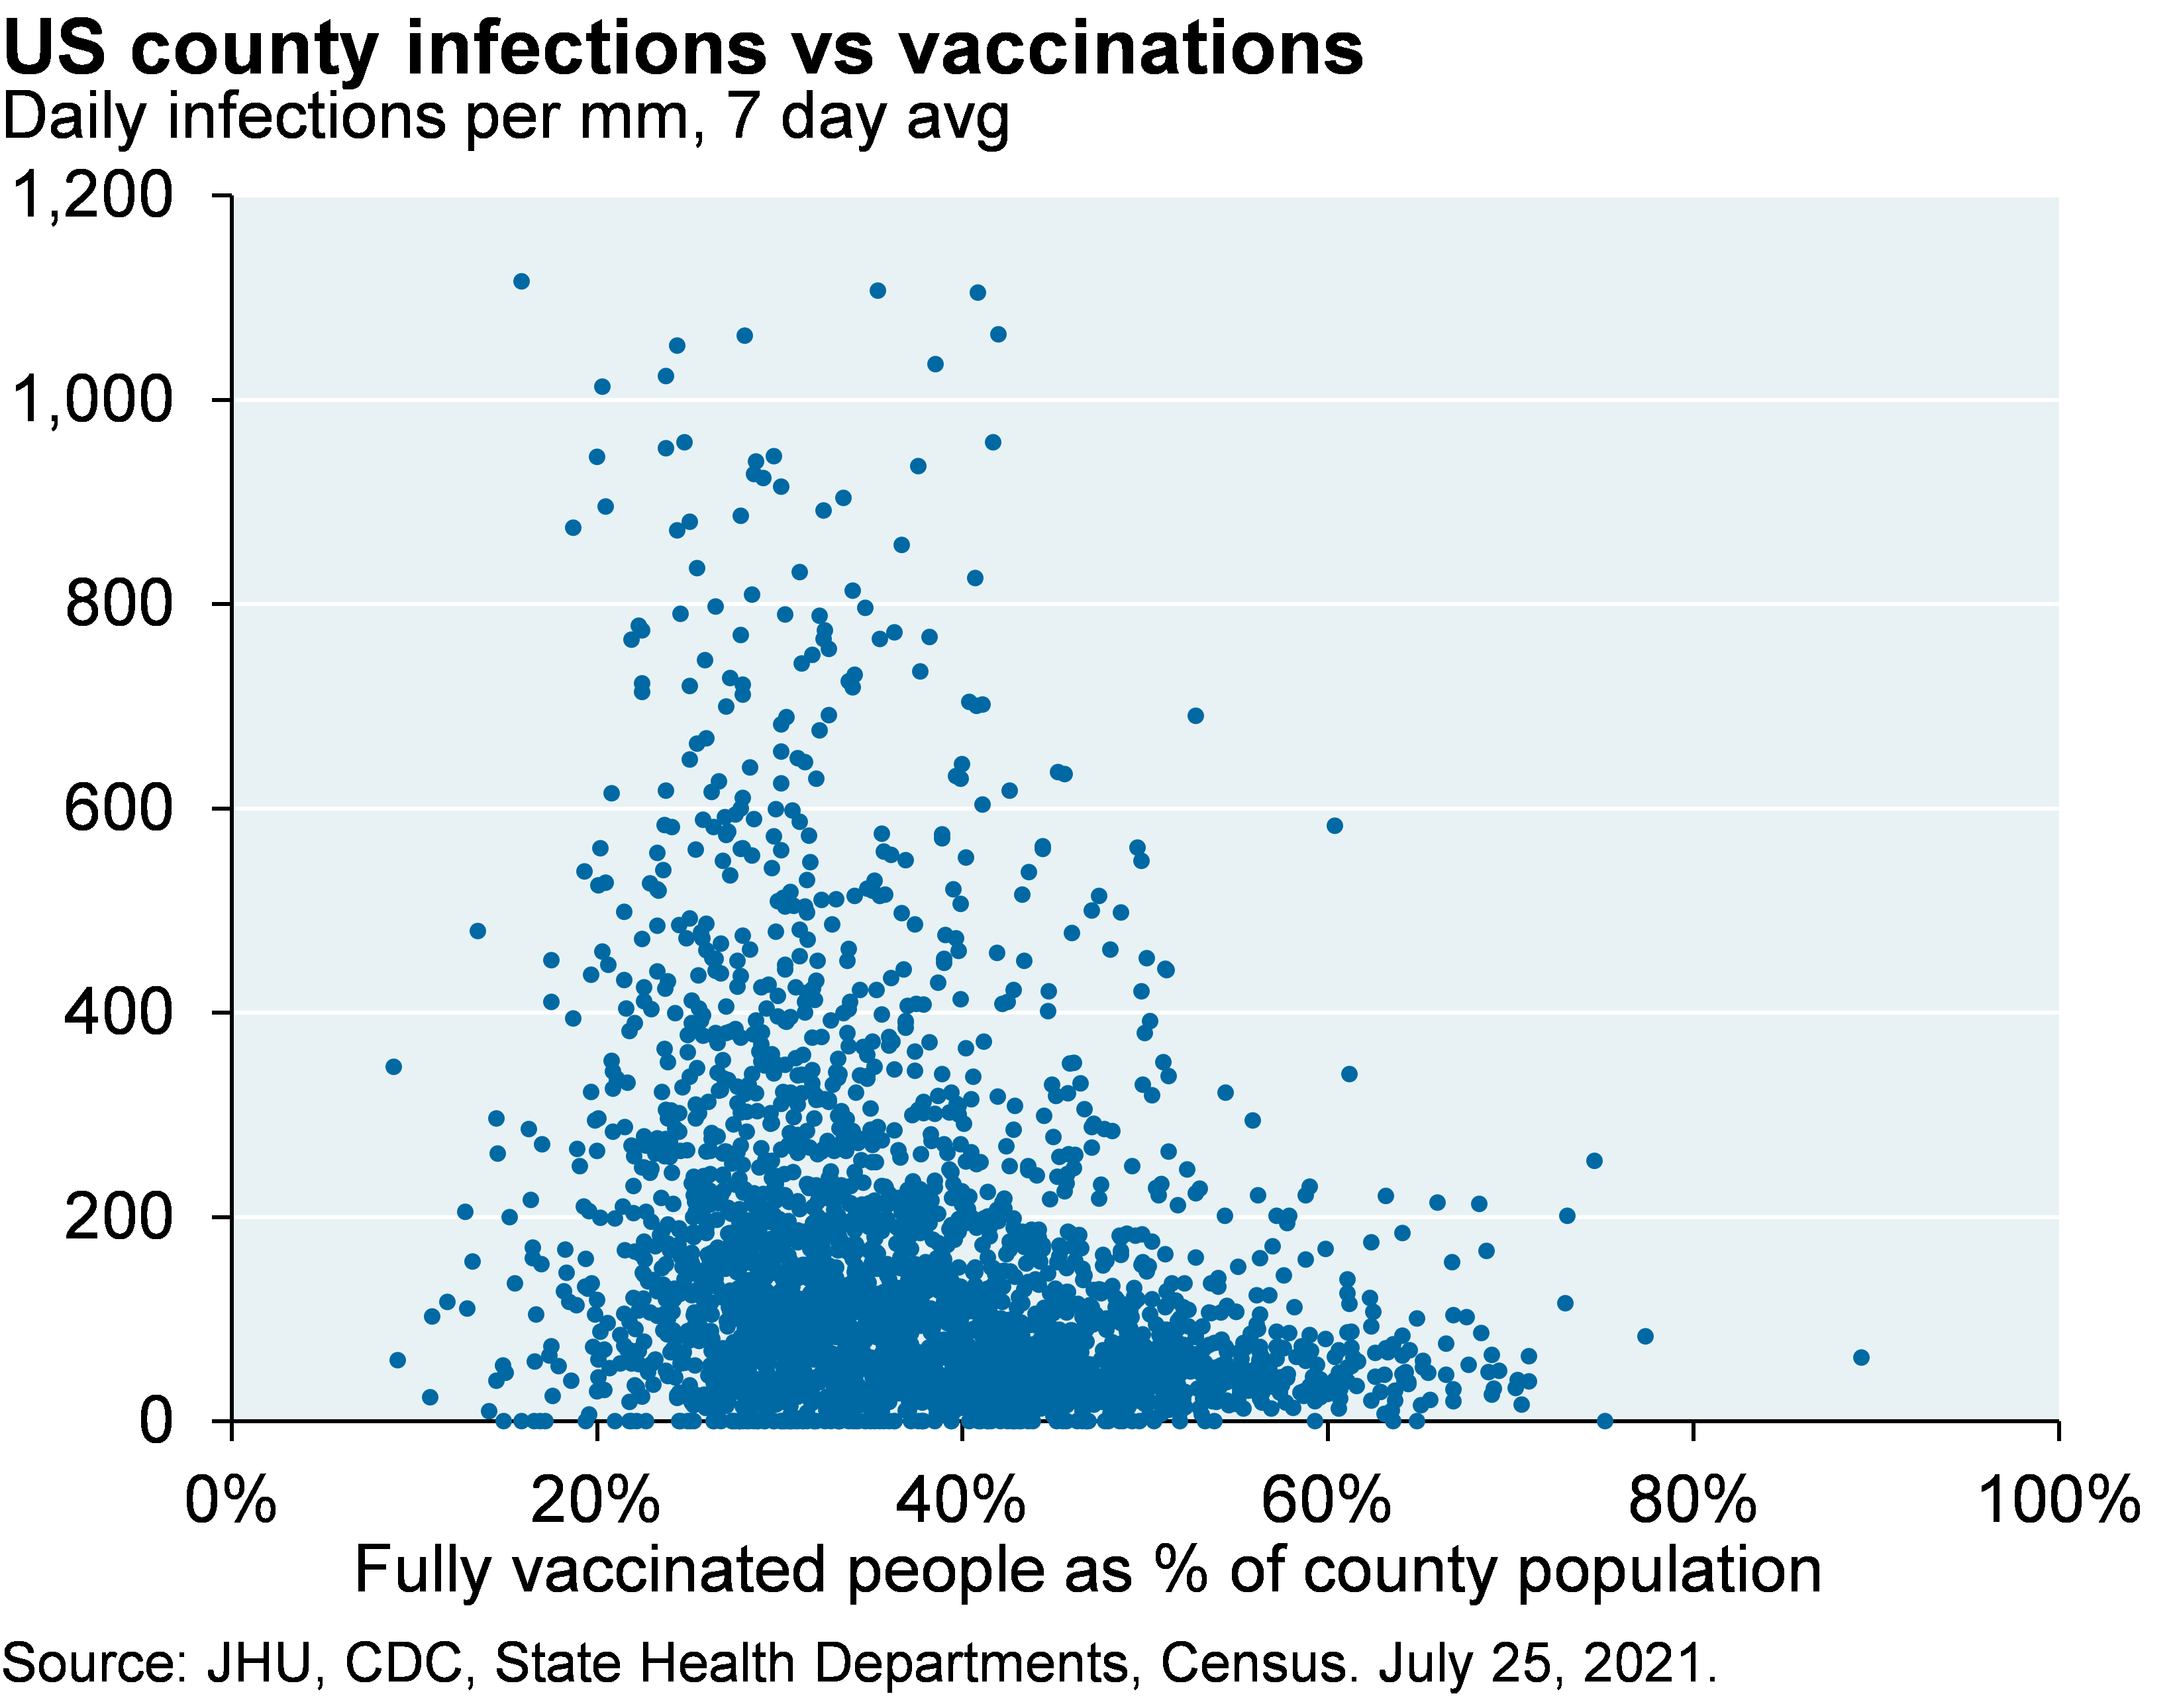 Scatter plot shows the 7 day average of daily infections per million people vs fully vaccinated people as a percentage of the population, where each dot represents a US county. While some outliers exits, most counties with higher vaccination rates have much lower infections rates.